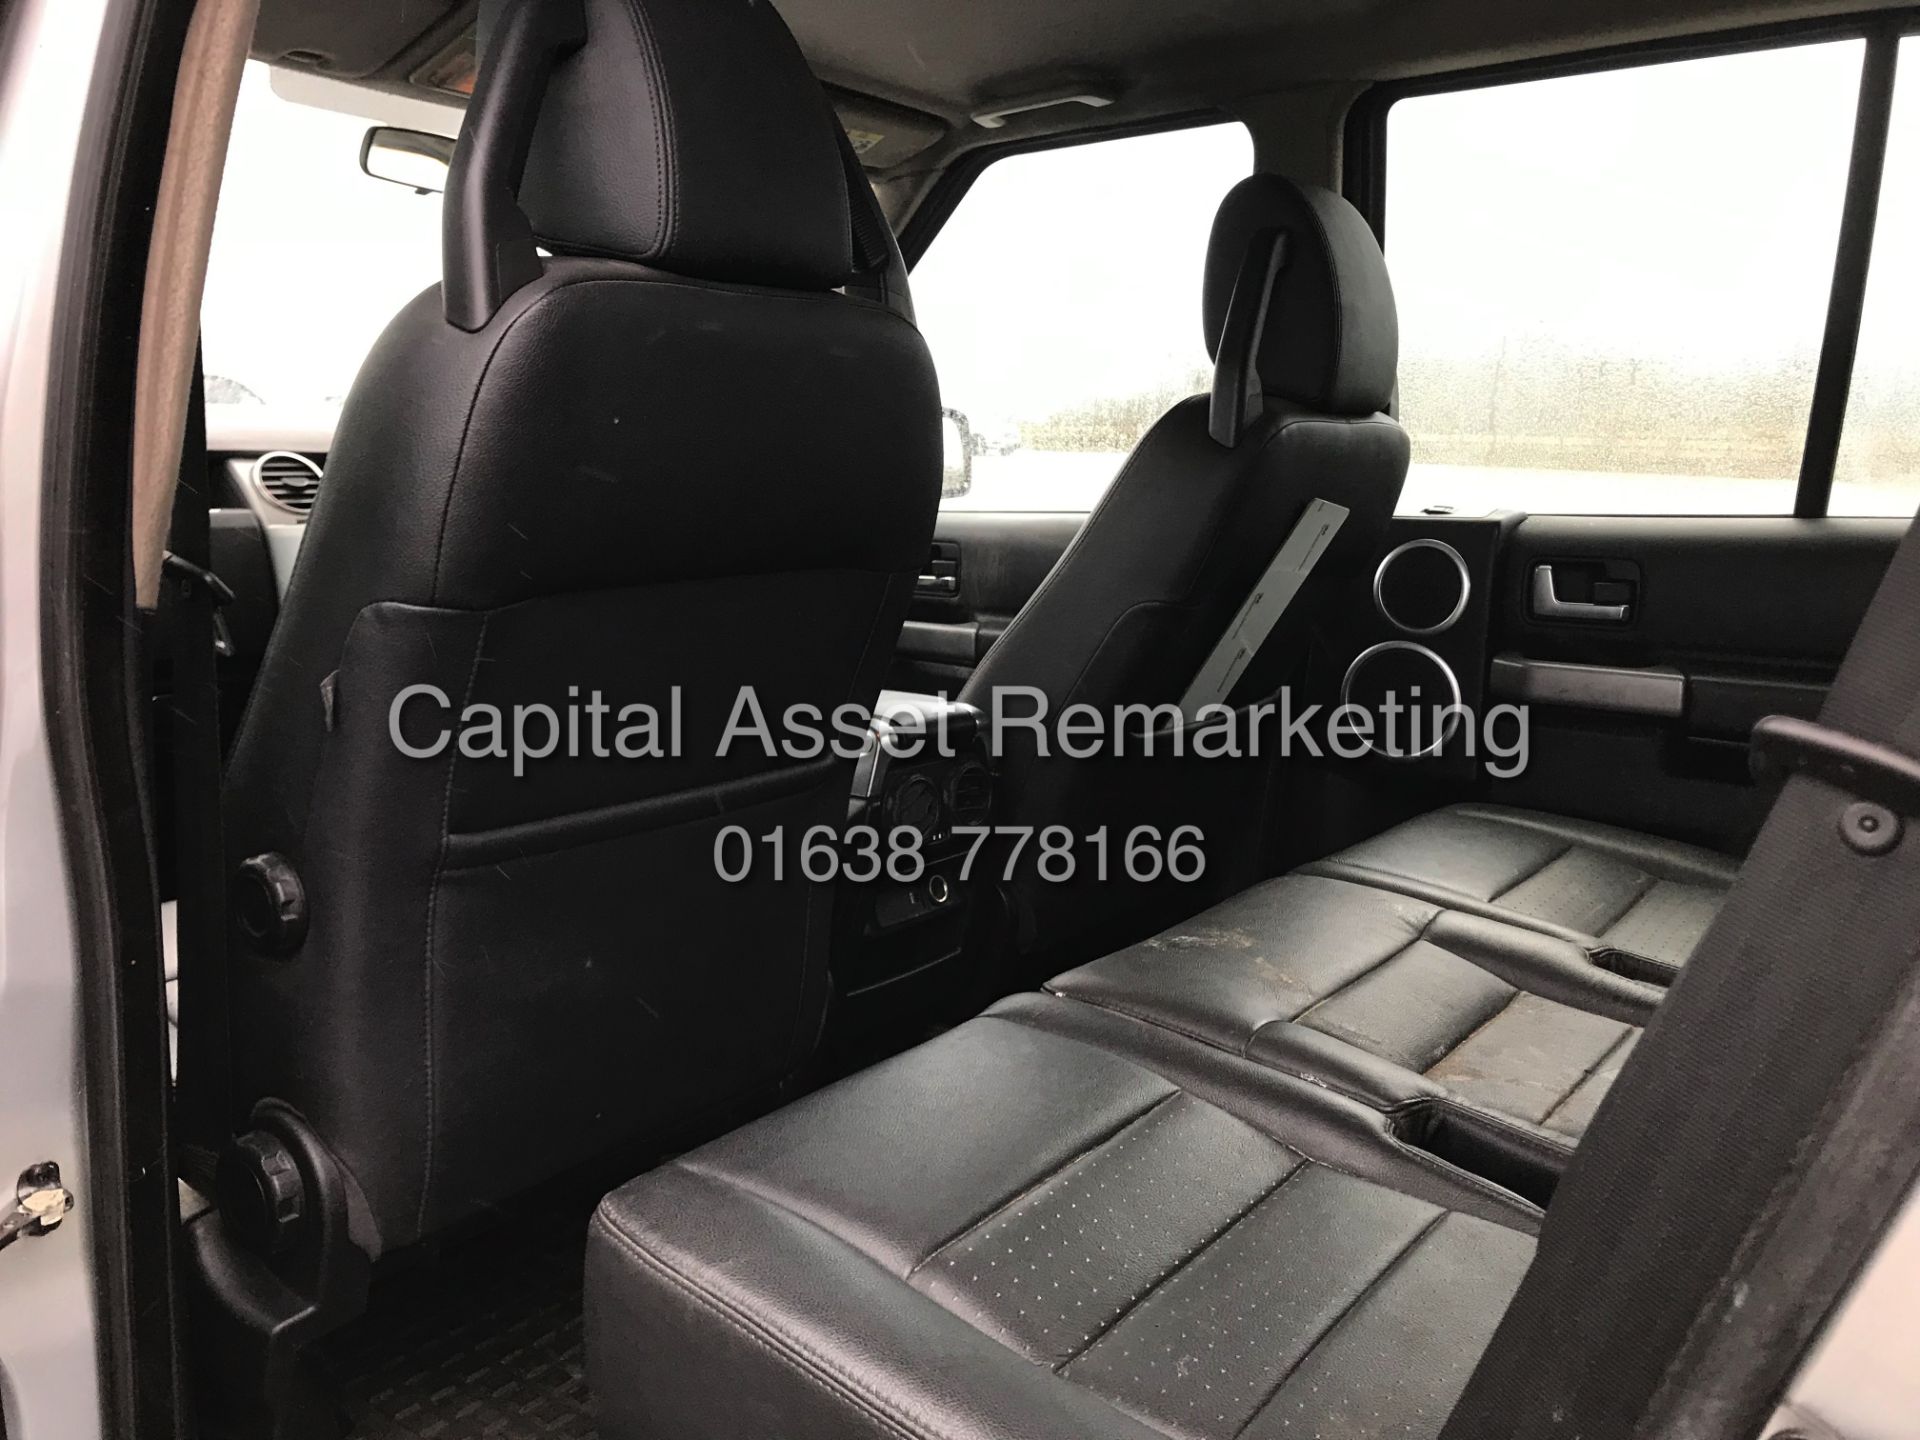 (ON SALE) LANDROVER DISCOVERY 3 "TDV6 2.7 AUTO - 59 REG - LEATHER - GREAT SPEC - 7 SEATER - WOW!!! - Image 11 of 17